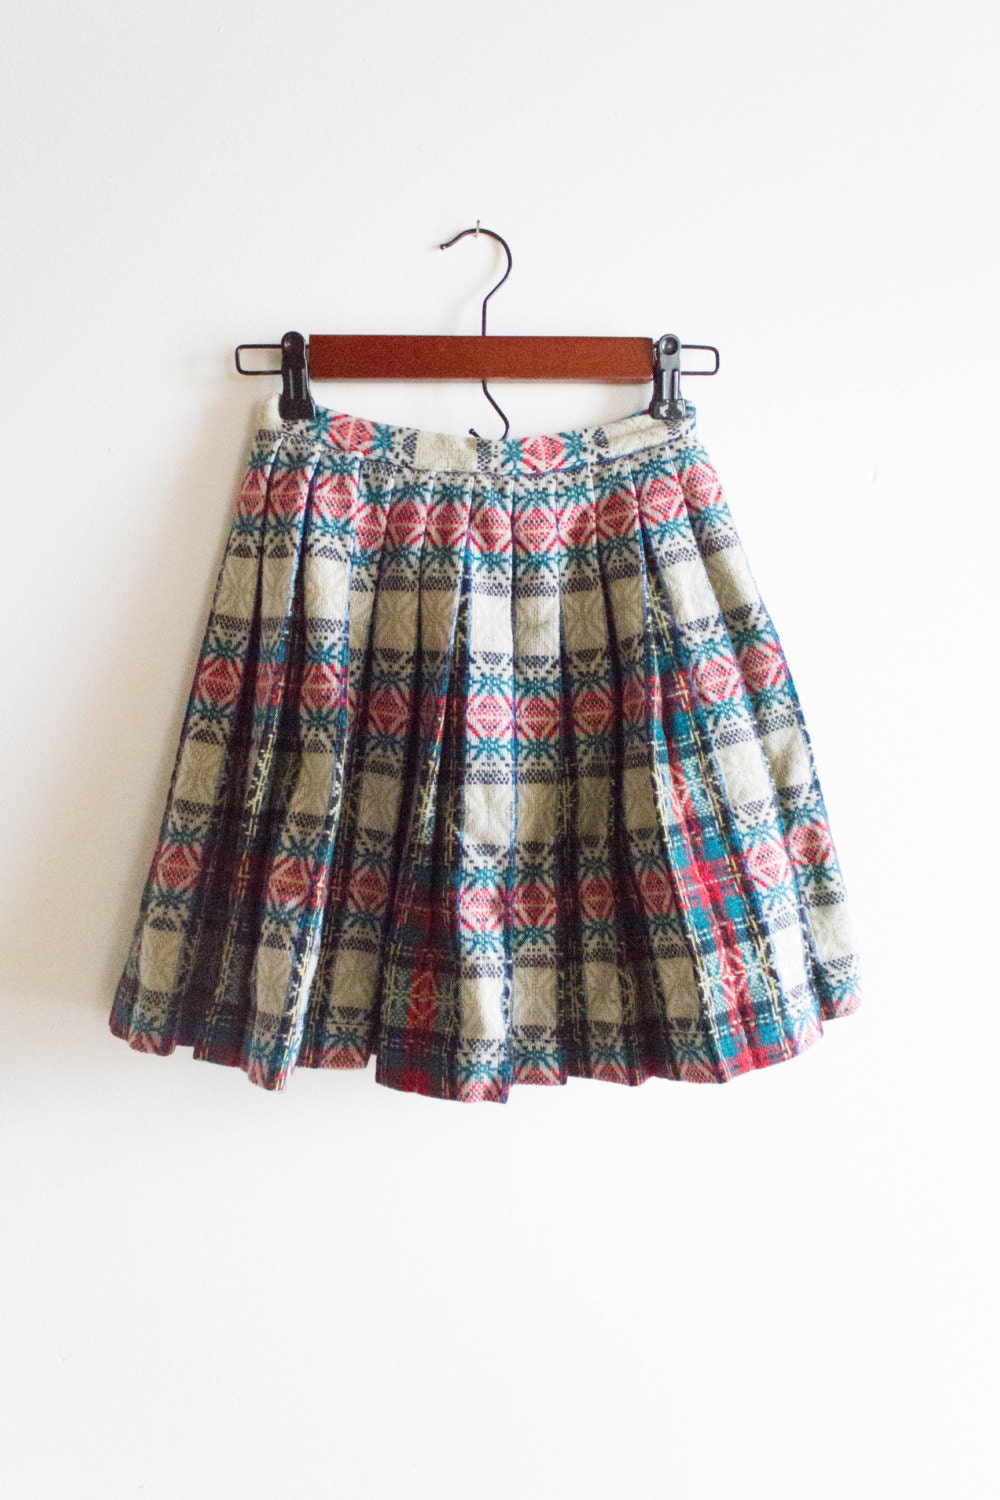 Pleated plaid wool skirt antique wool plaid skirt by ZinandHoney